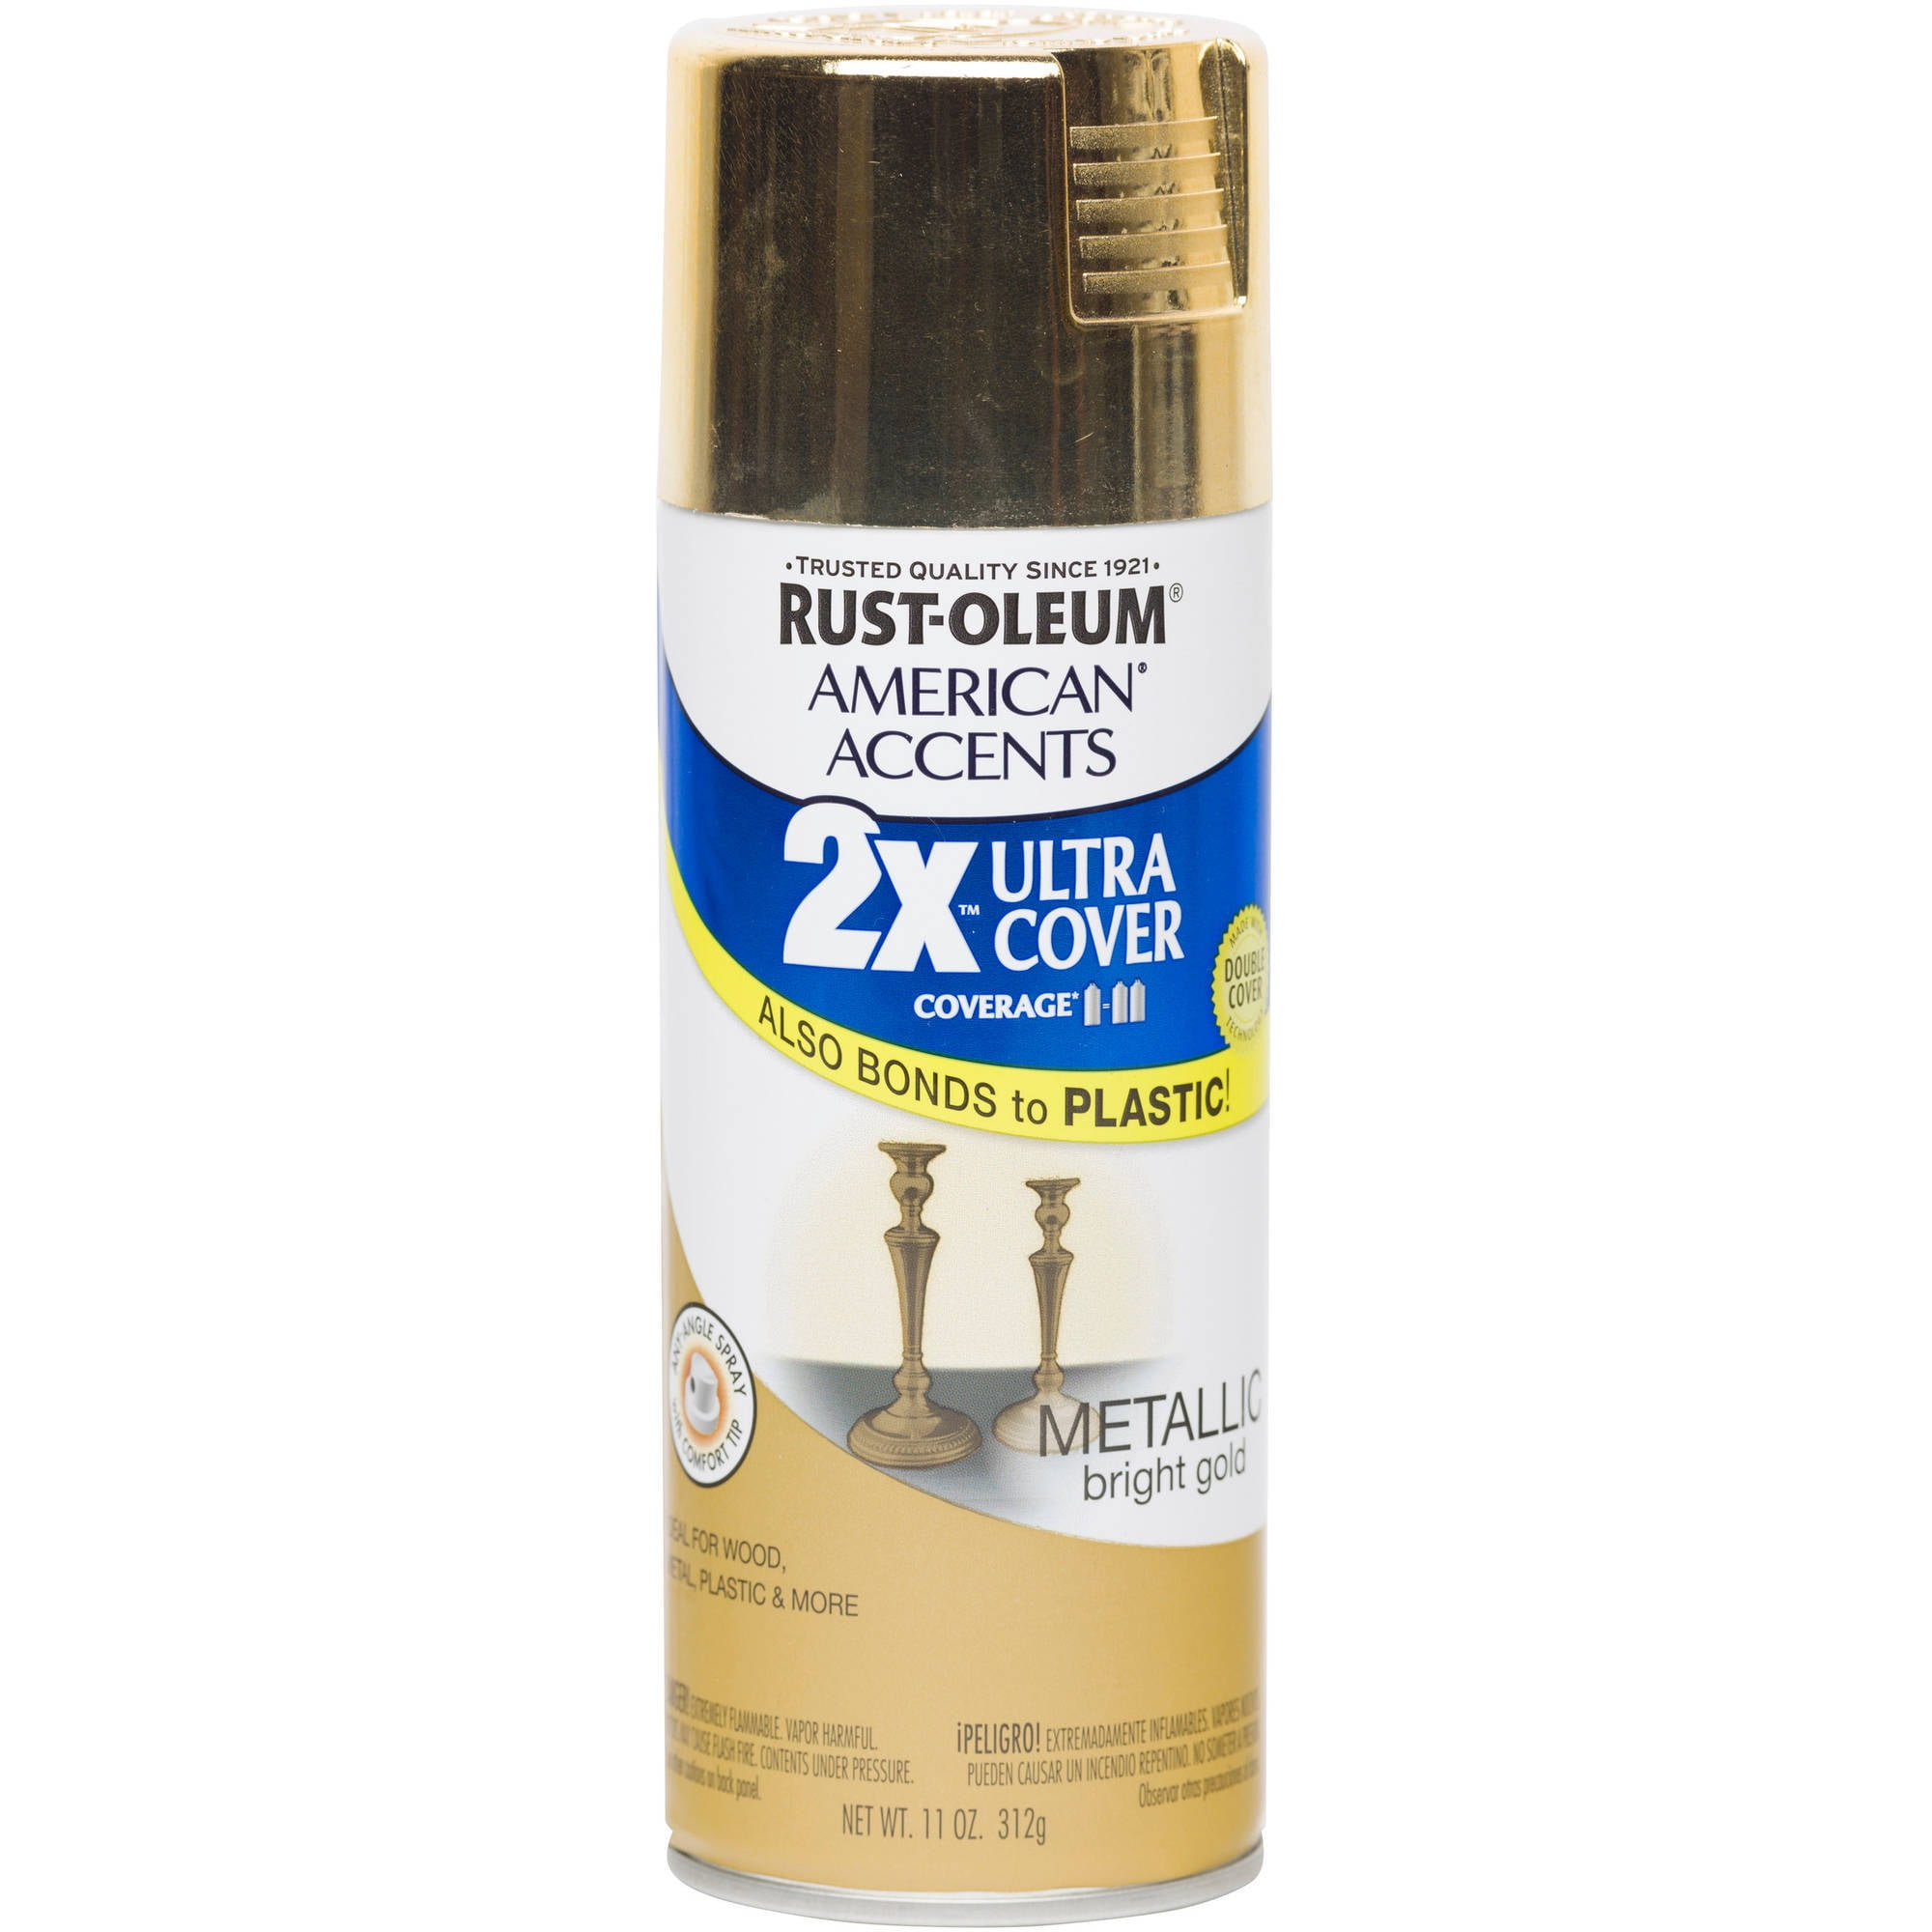 METALLIC GOLD Finish 11 Ounce Aerosol Spray Can Shiny Golden Paint AND  Primer Ultra Cover American Accents Rustoleum Rust-oleum 327909 -   Israel